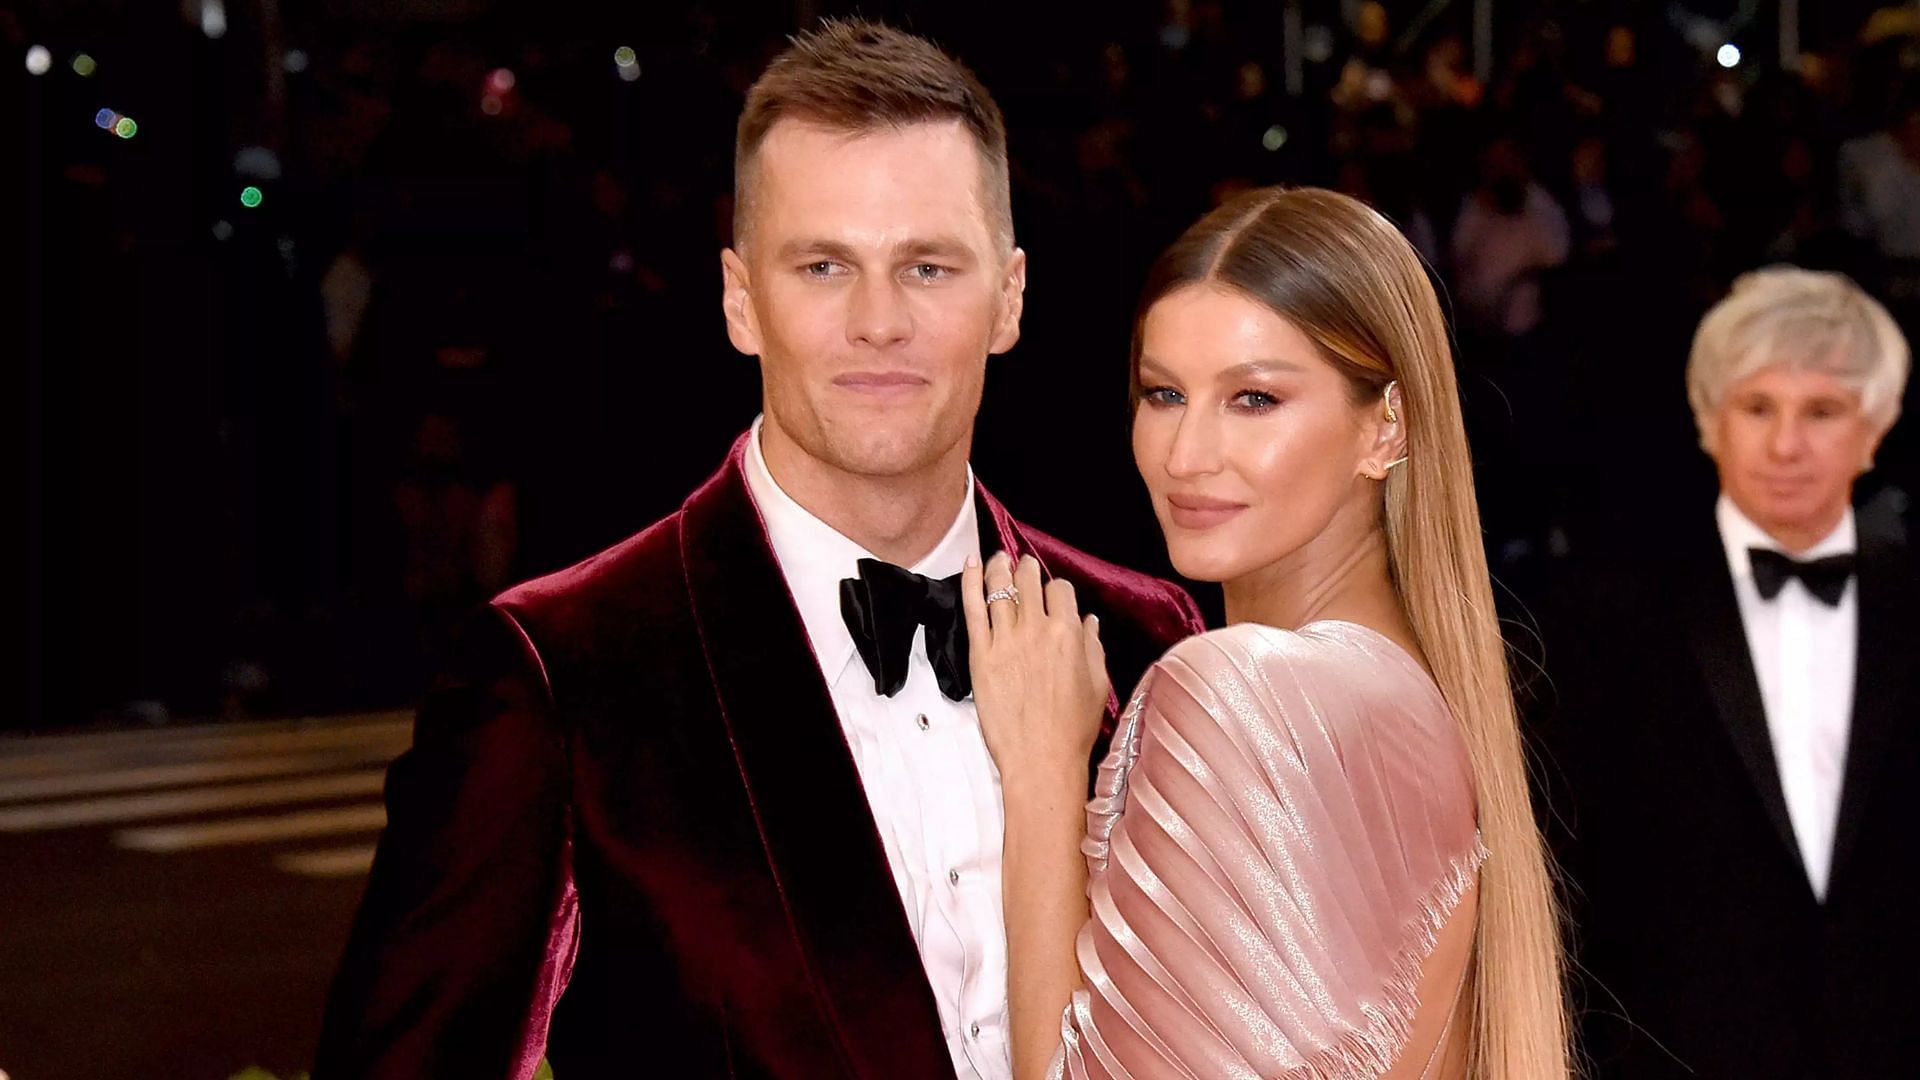 Gisele Bundchen and Tom Brady at the 2019 Met Gala. (Image credit: John Shearer/Getty Images)